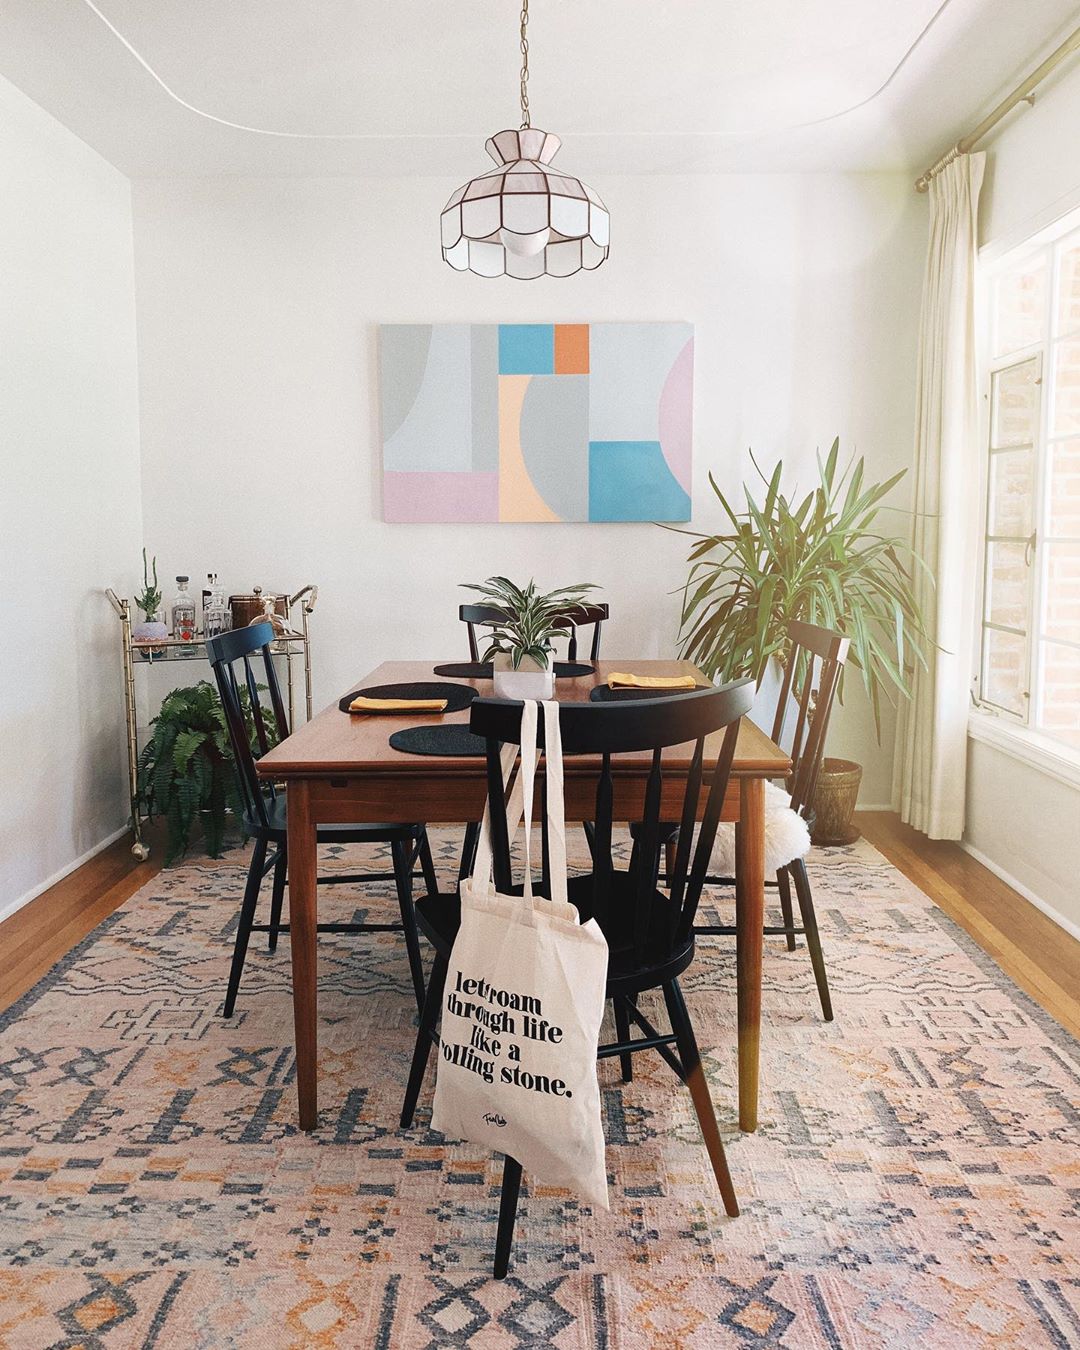 Dining room with vintage Tiffany lamp. Photo by Instagram user @clothesandpizza